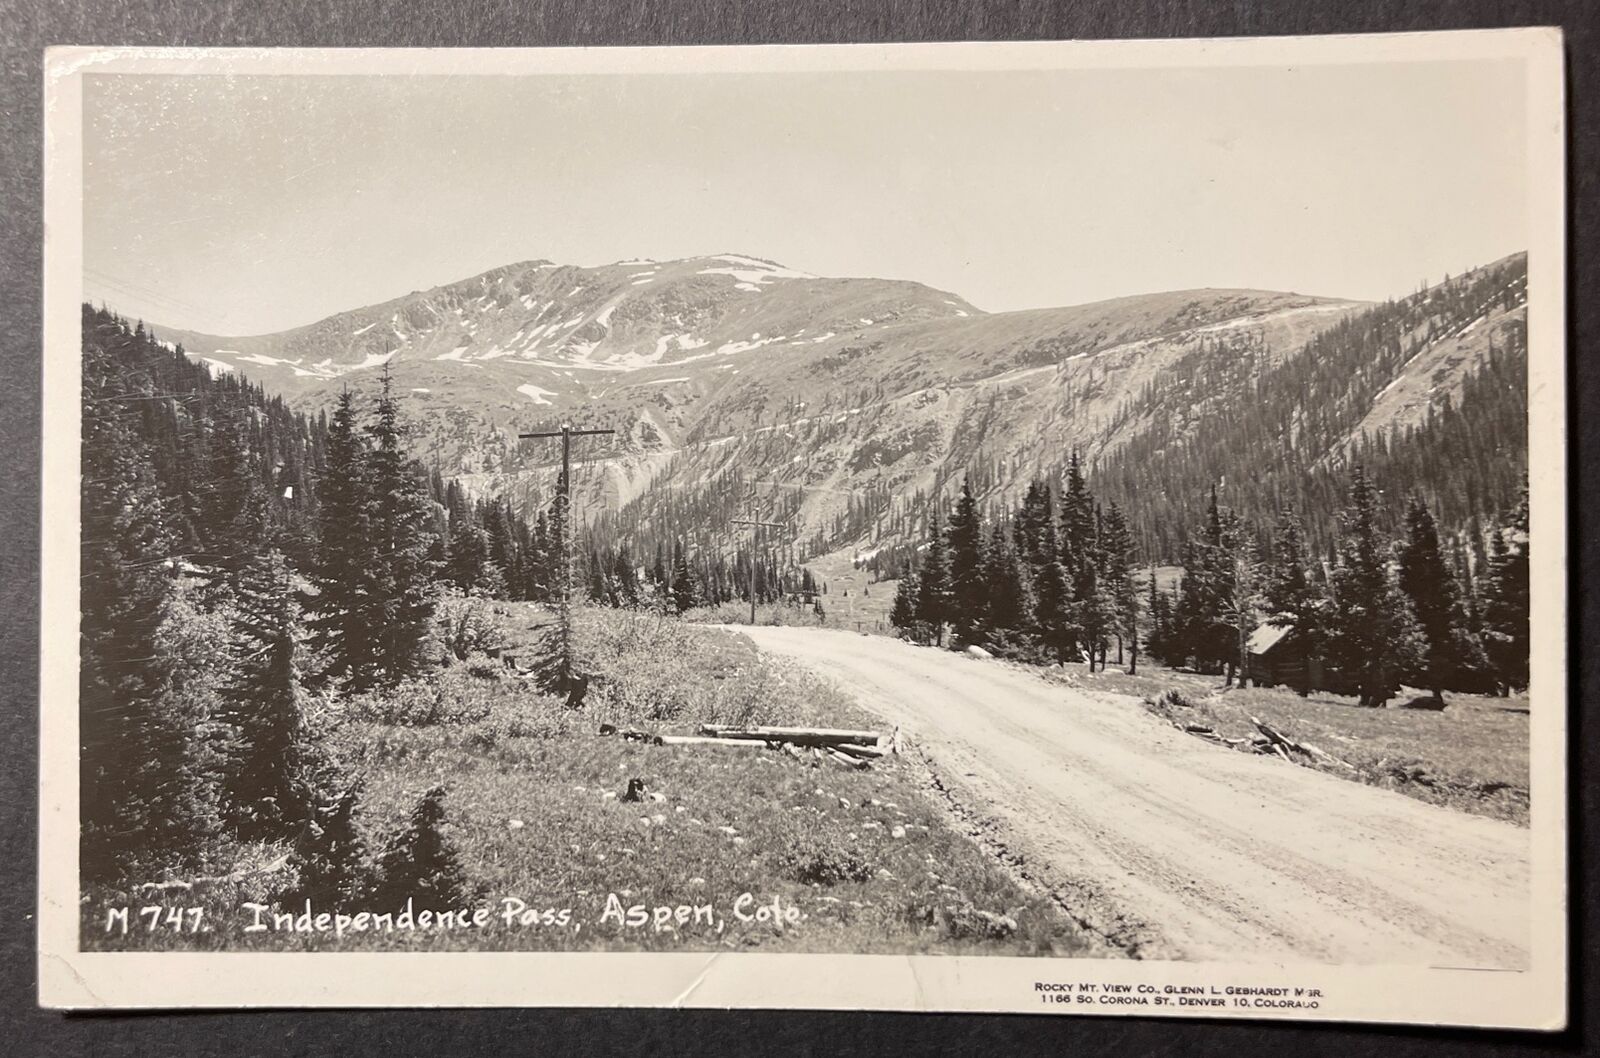 Independence Pass Aspen Colorado RPPC Rocky Mt View Co M 747